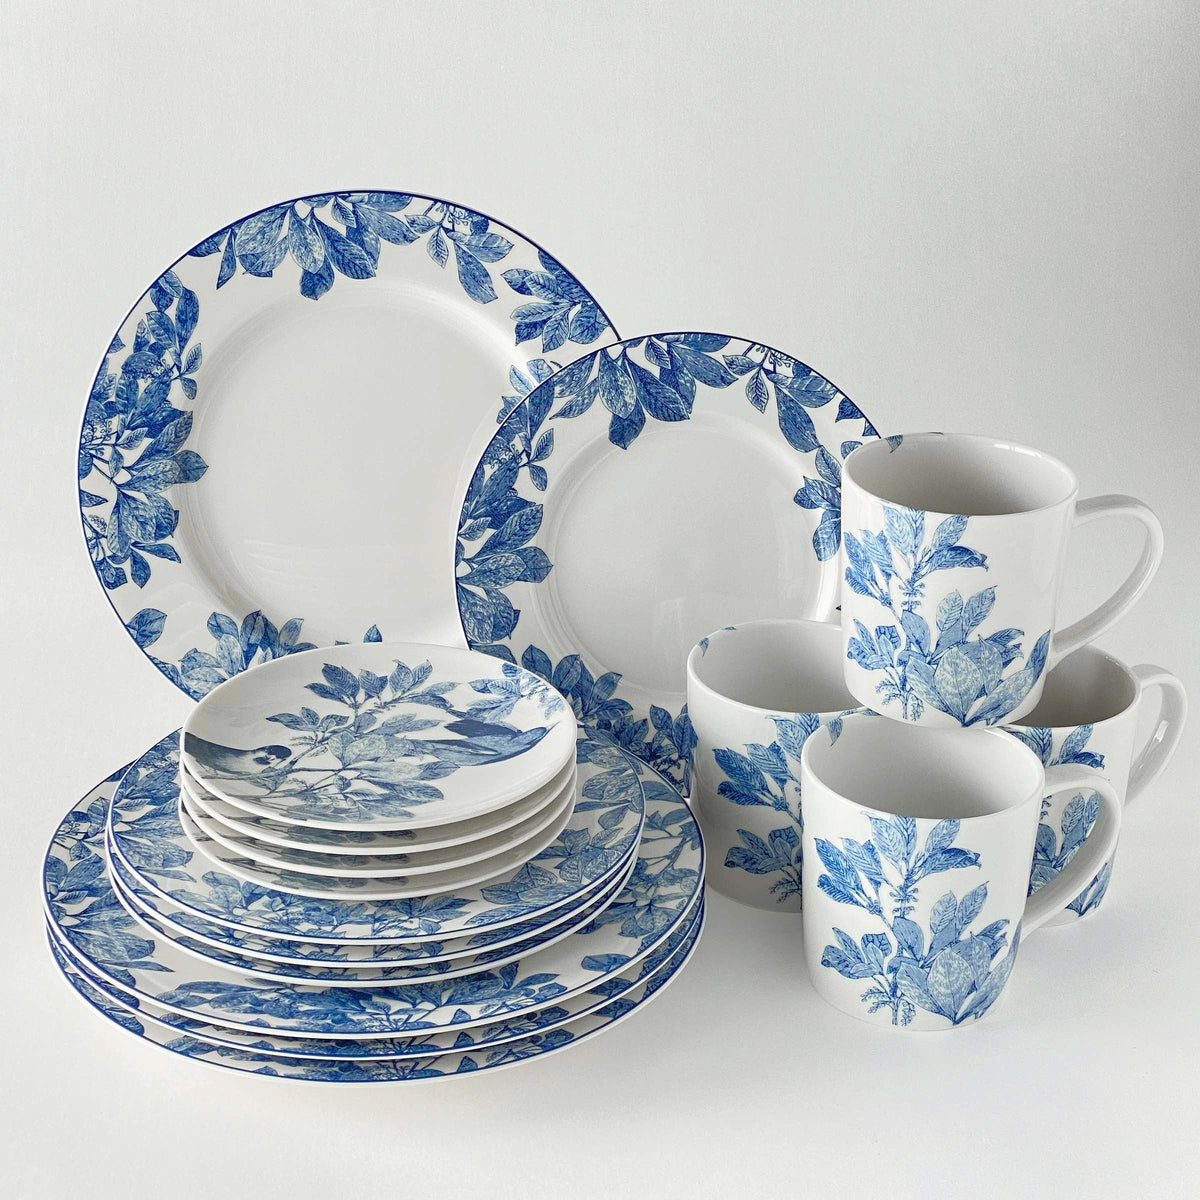 The Blue Arbor 16 Piece Dinnerware Set from Caskata includes 4 each dinner, salad and canape plates as well as 4 mugs.